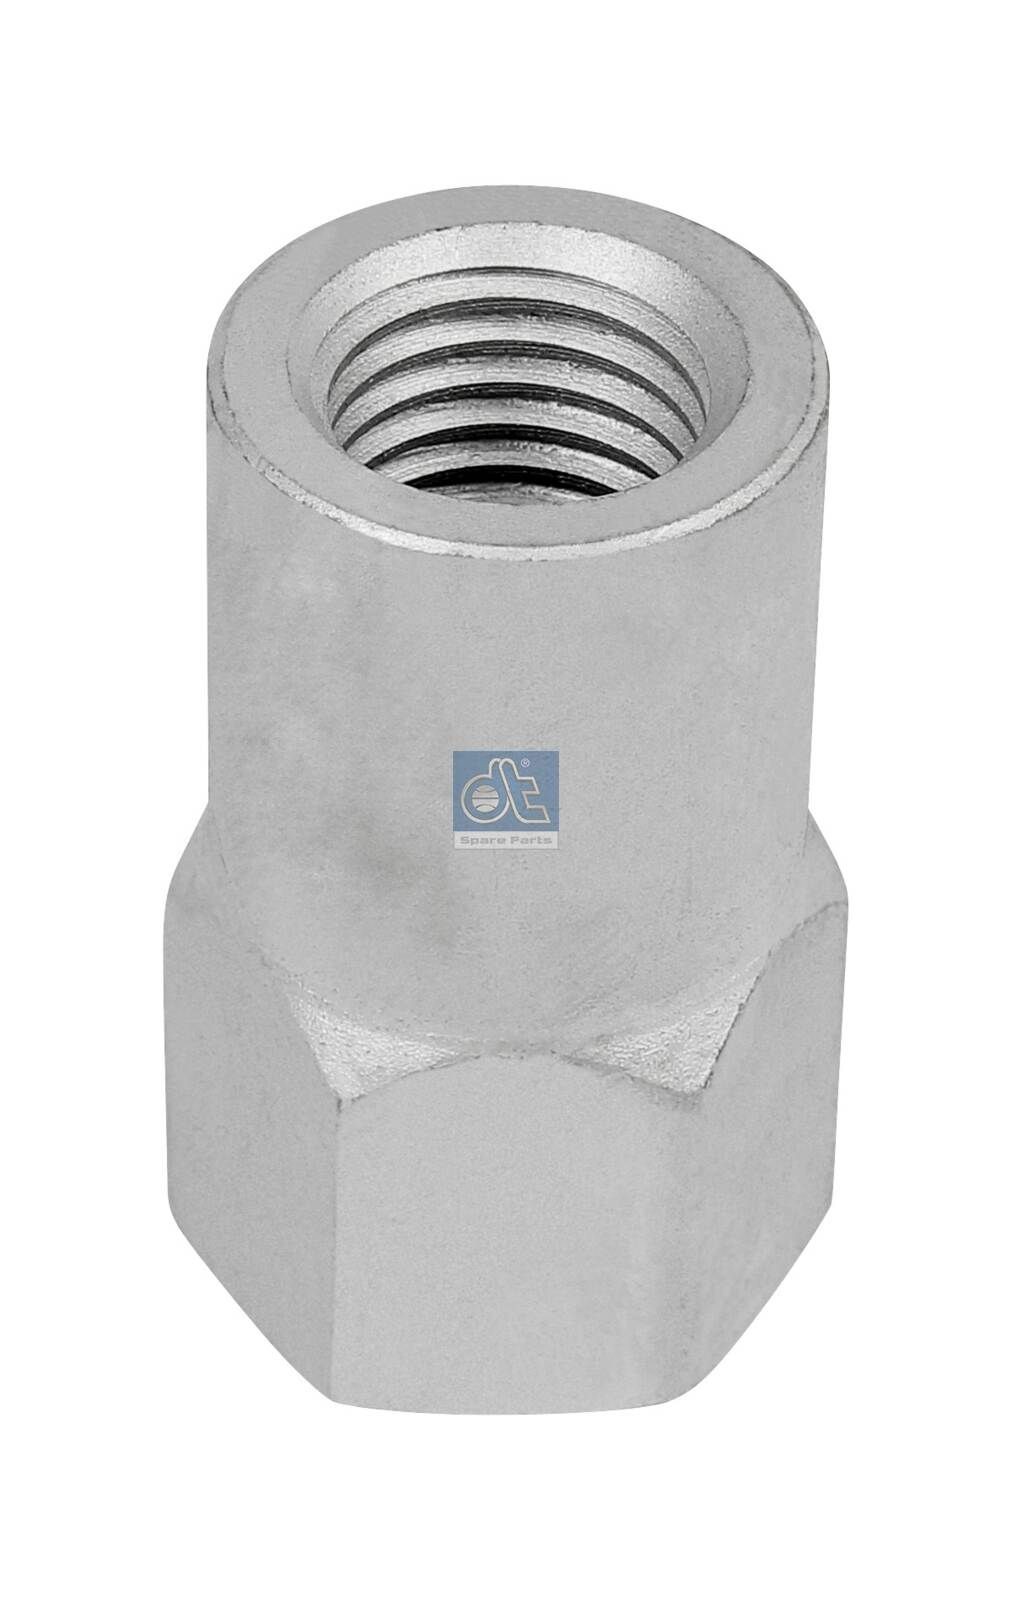 DT Spare Parts 1.25437 Spring Clamp Nut 276681